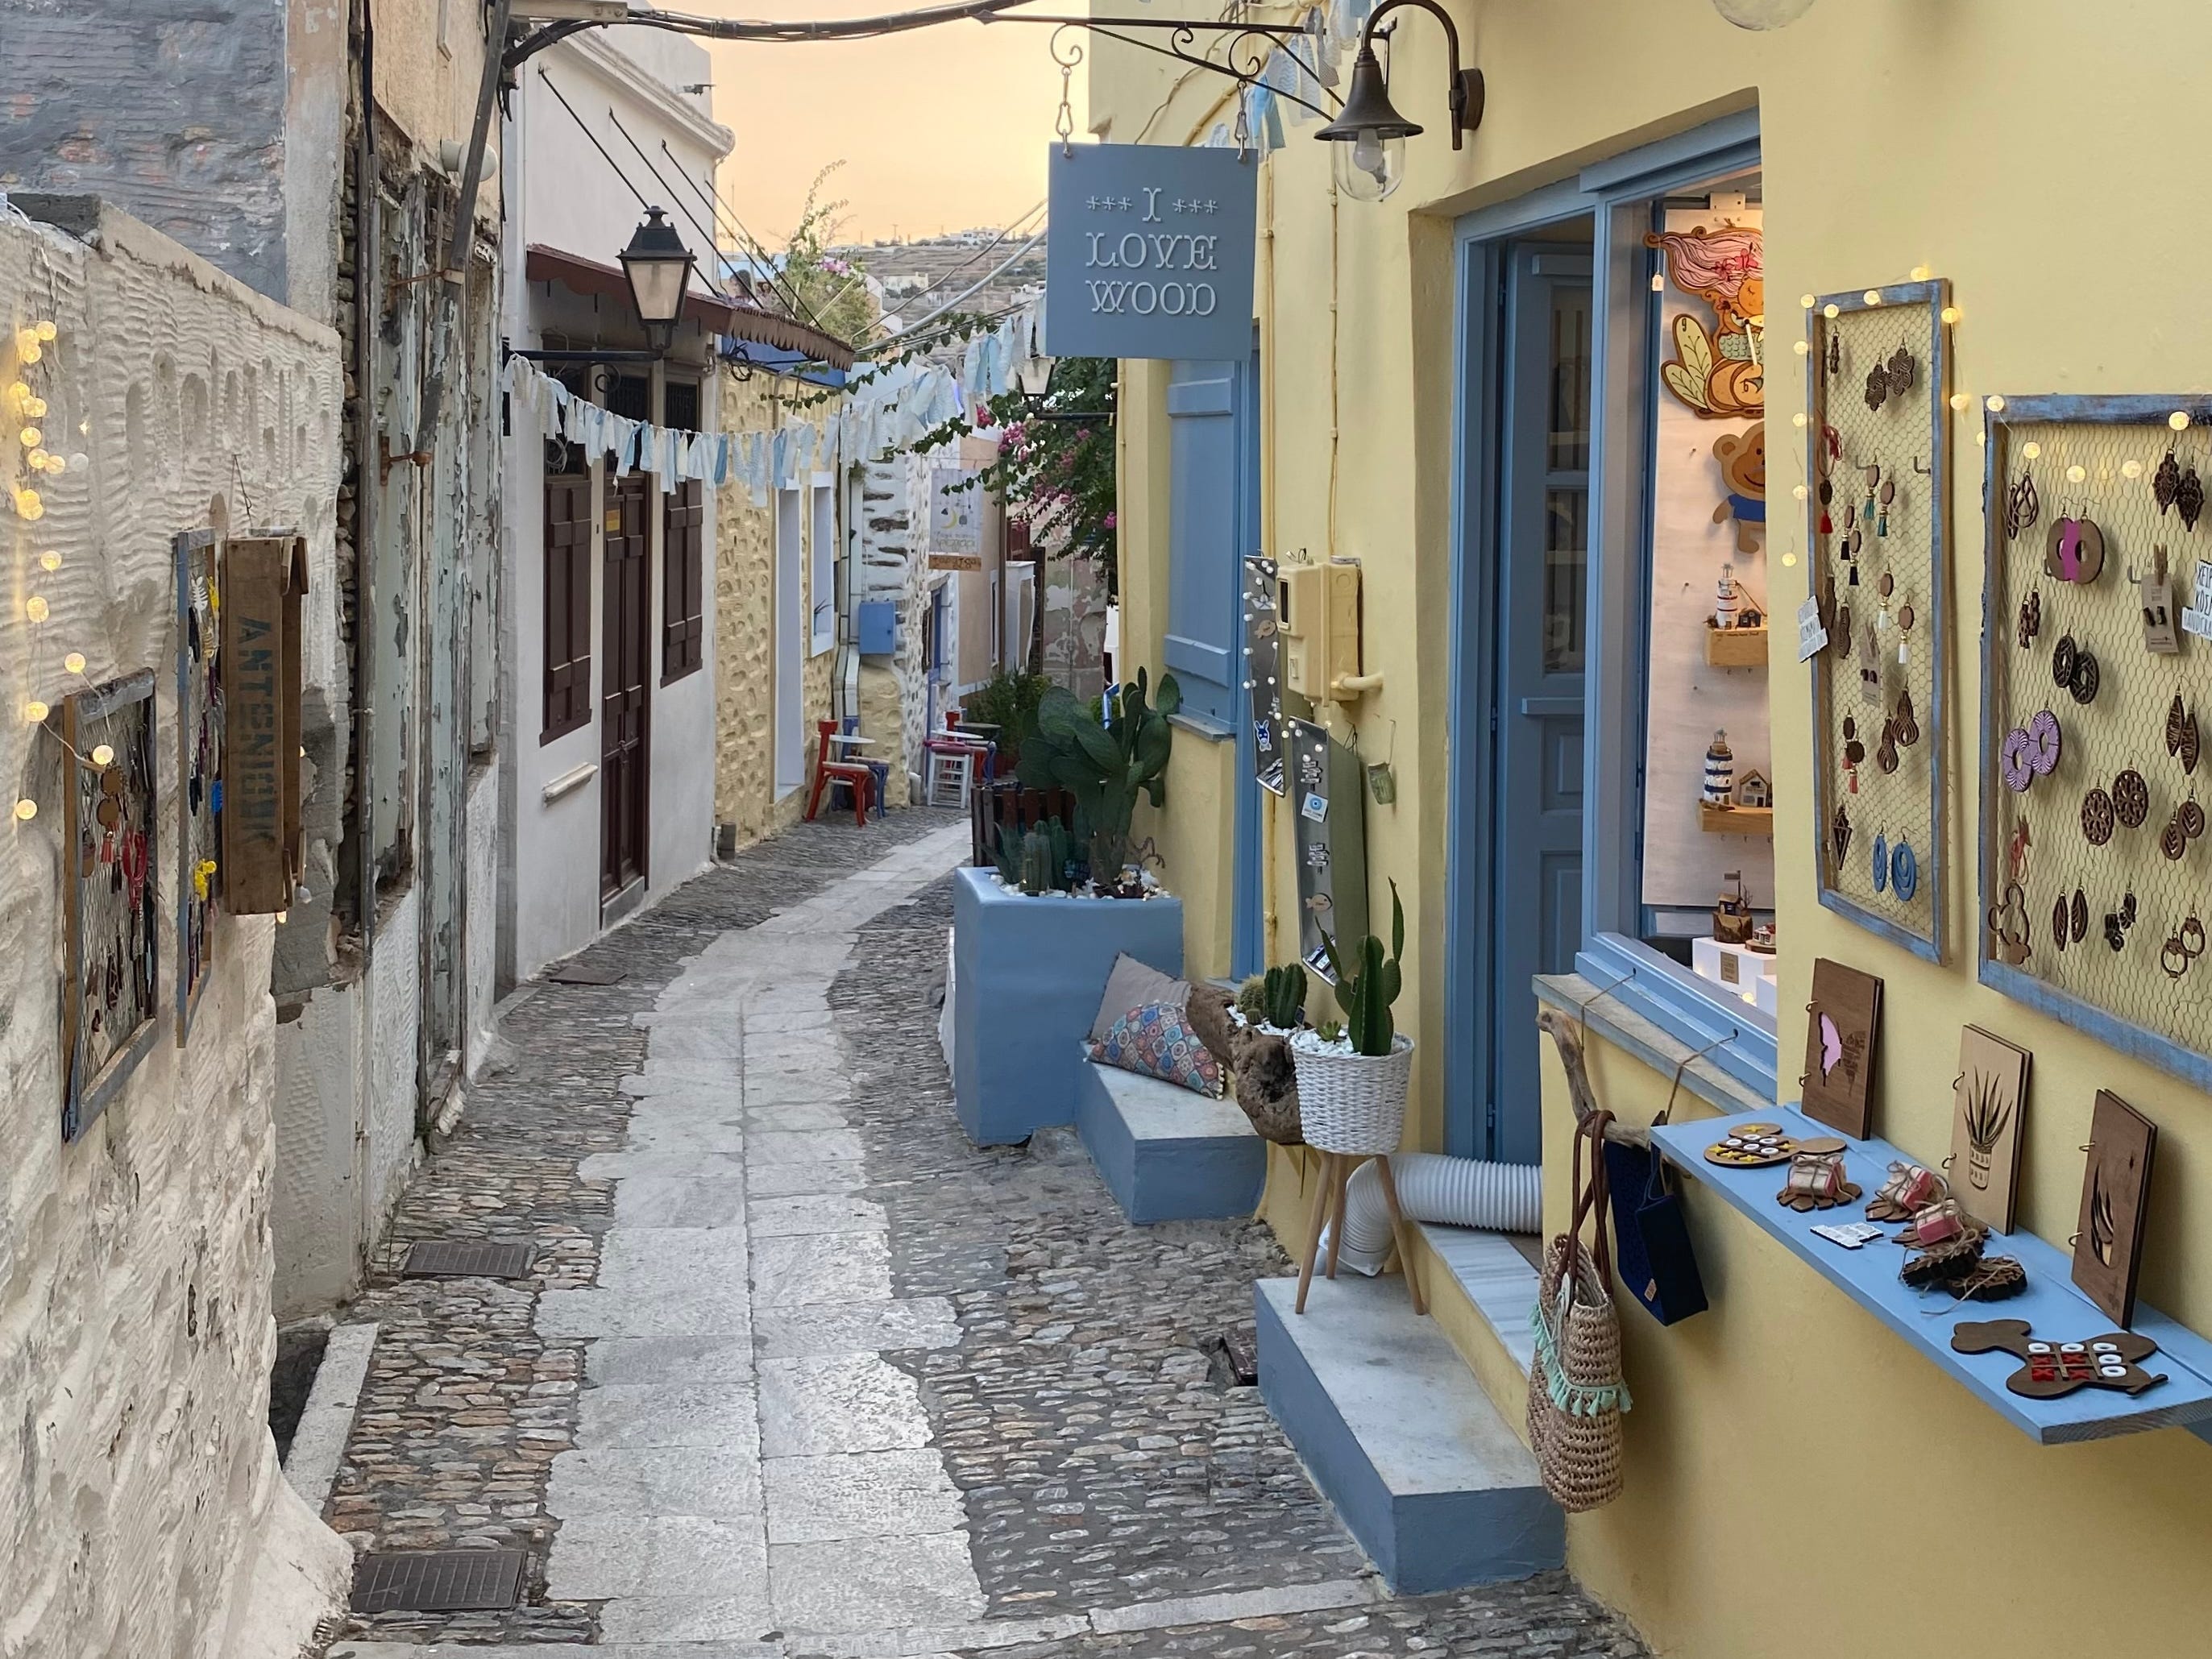 <p><span>If you can manage all the steps, walking uphill to Ano Syros from Ermoupoli is a treat. </span></p><p><span>You'll find a lot of craft, jewelry, clothing, and other shops, as well as cute cafés to explore in this part of the island.</span></p><p><span>Make sure to arrive in the morning or late afternoon as many stores close for a bit around midday.</span></p>